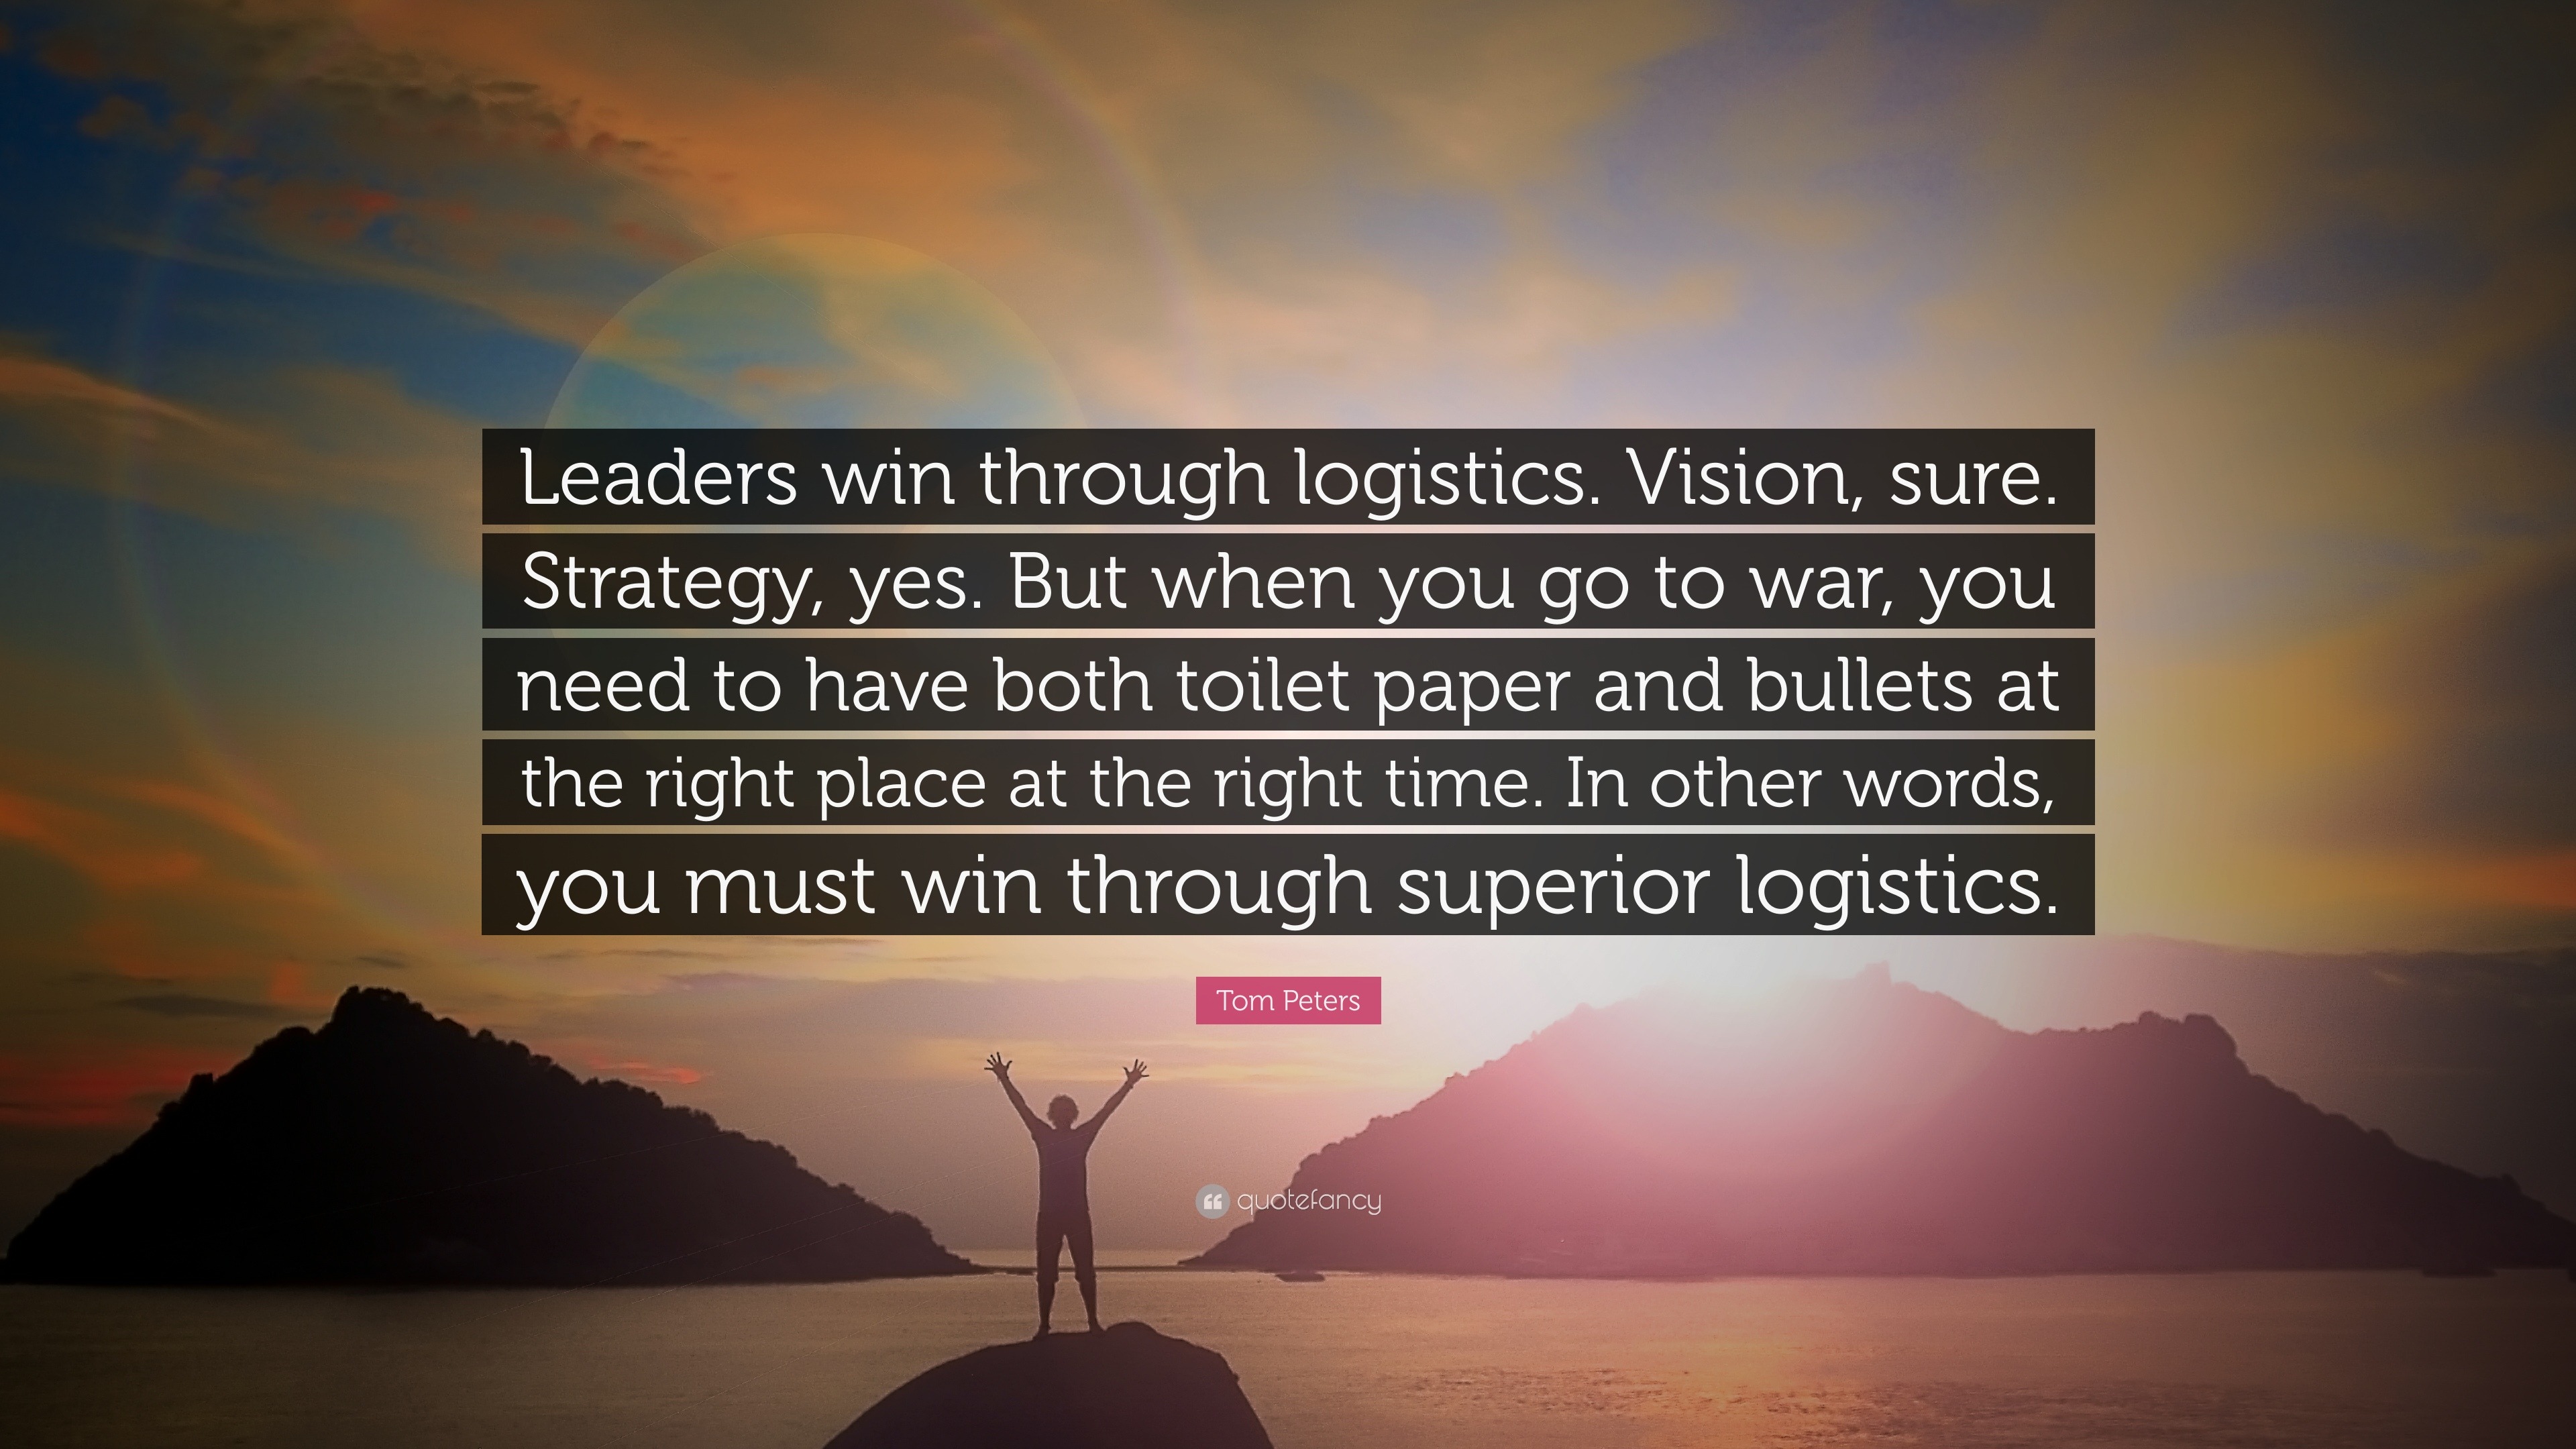 Tom Peters Quote: “Leaders win through logistics. Vision, sure